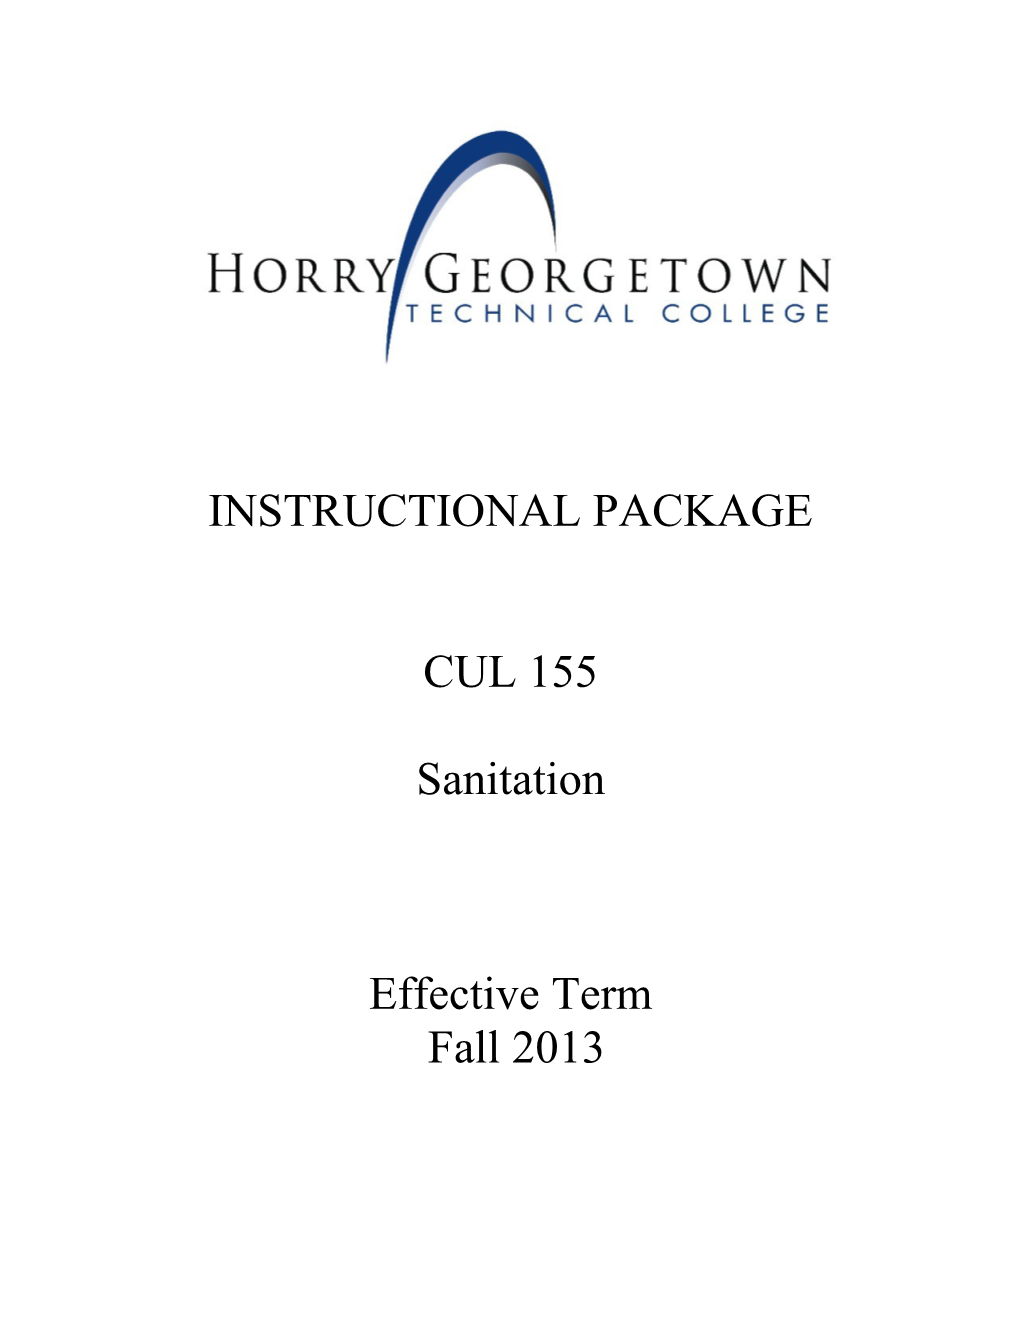 Instructional Package s2